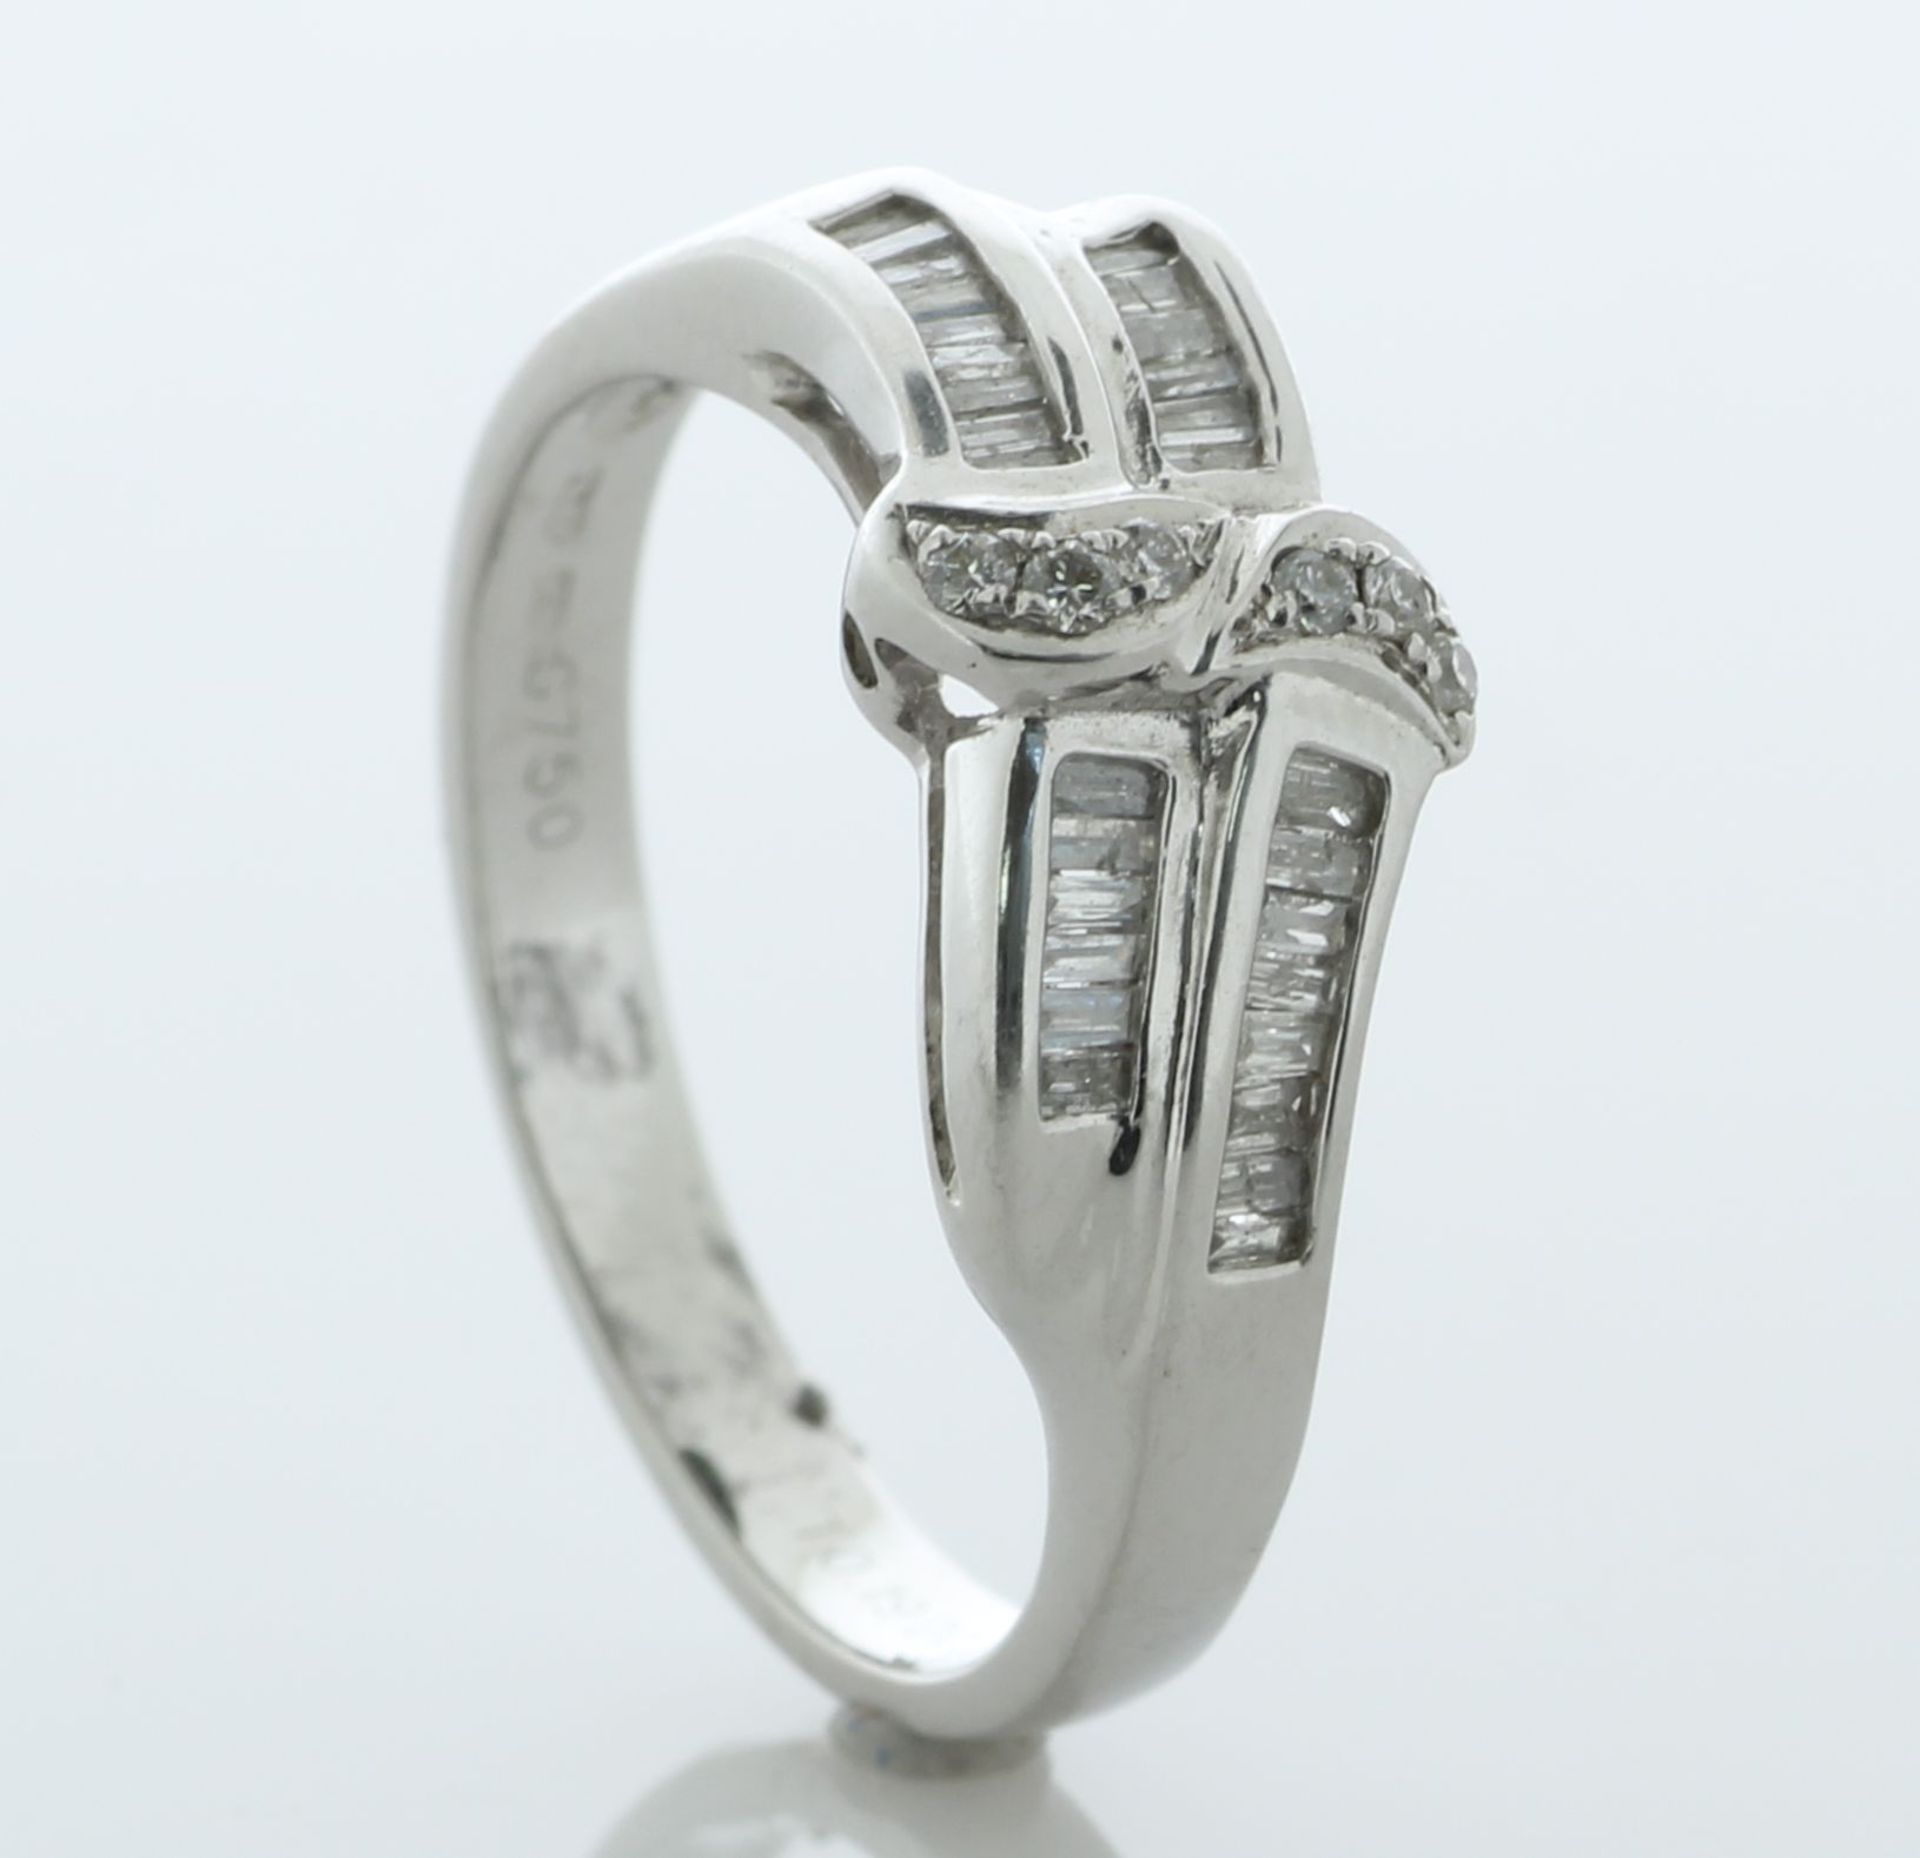 18ct White Gold Diamond 'Bow' Ring 0.23 Carats - Valued By AGI £2,195.00 - A stunning 18ct white